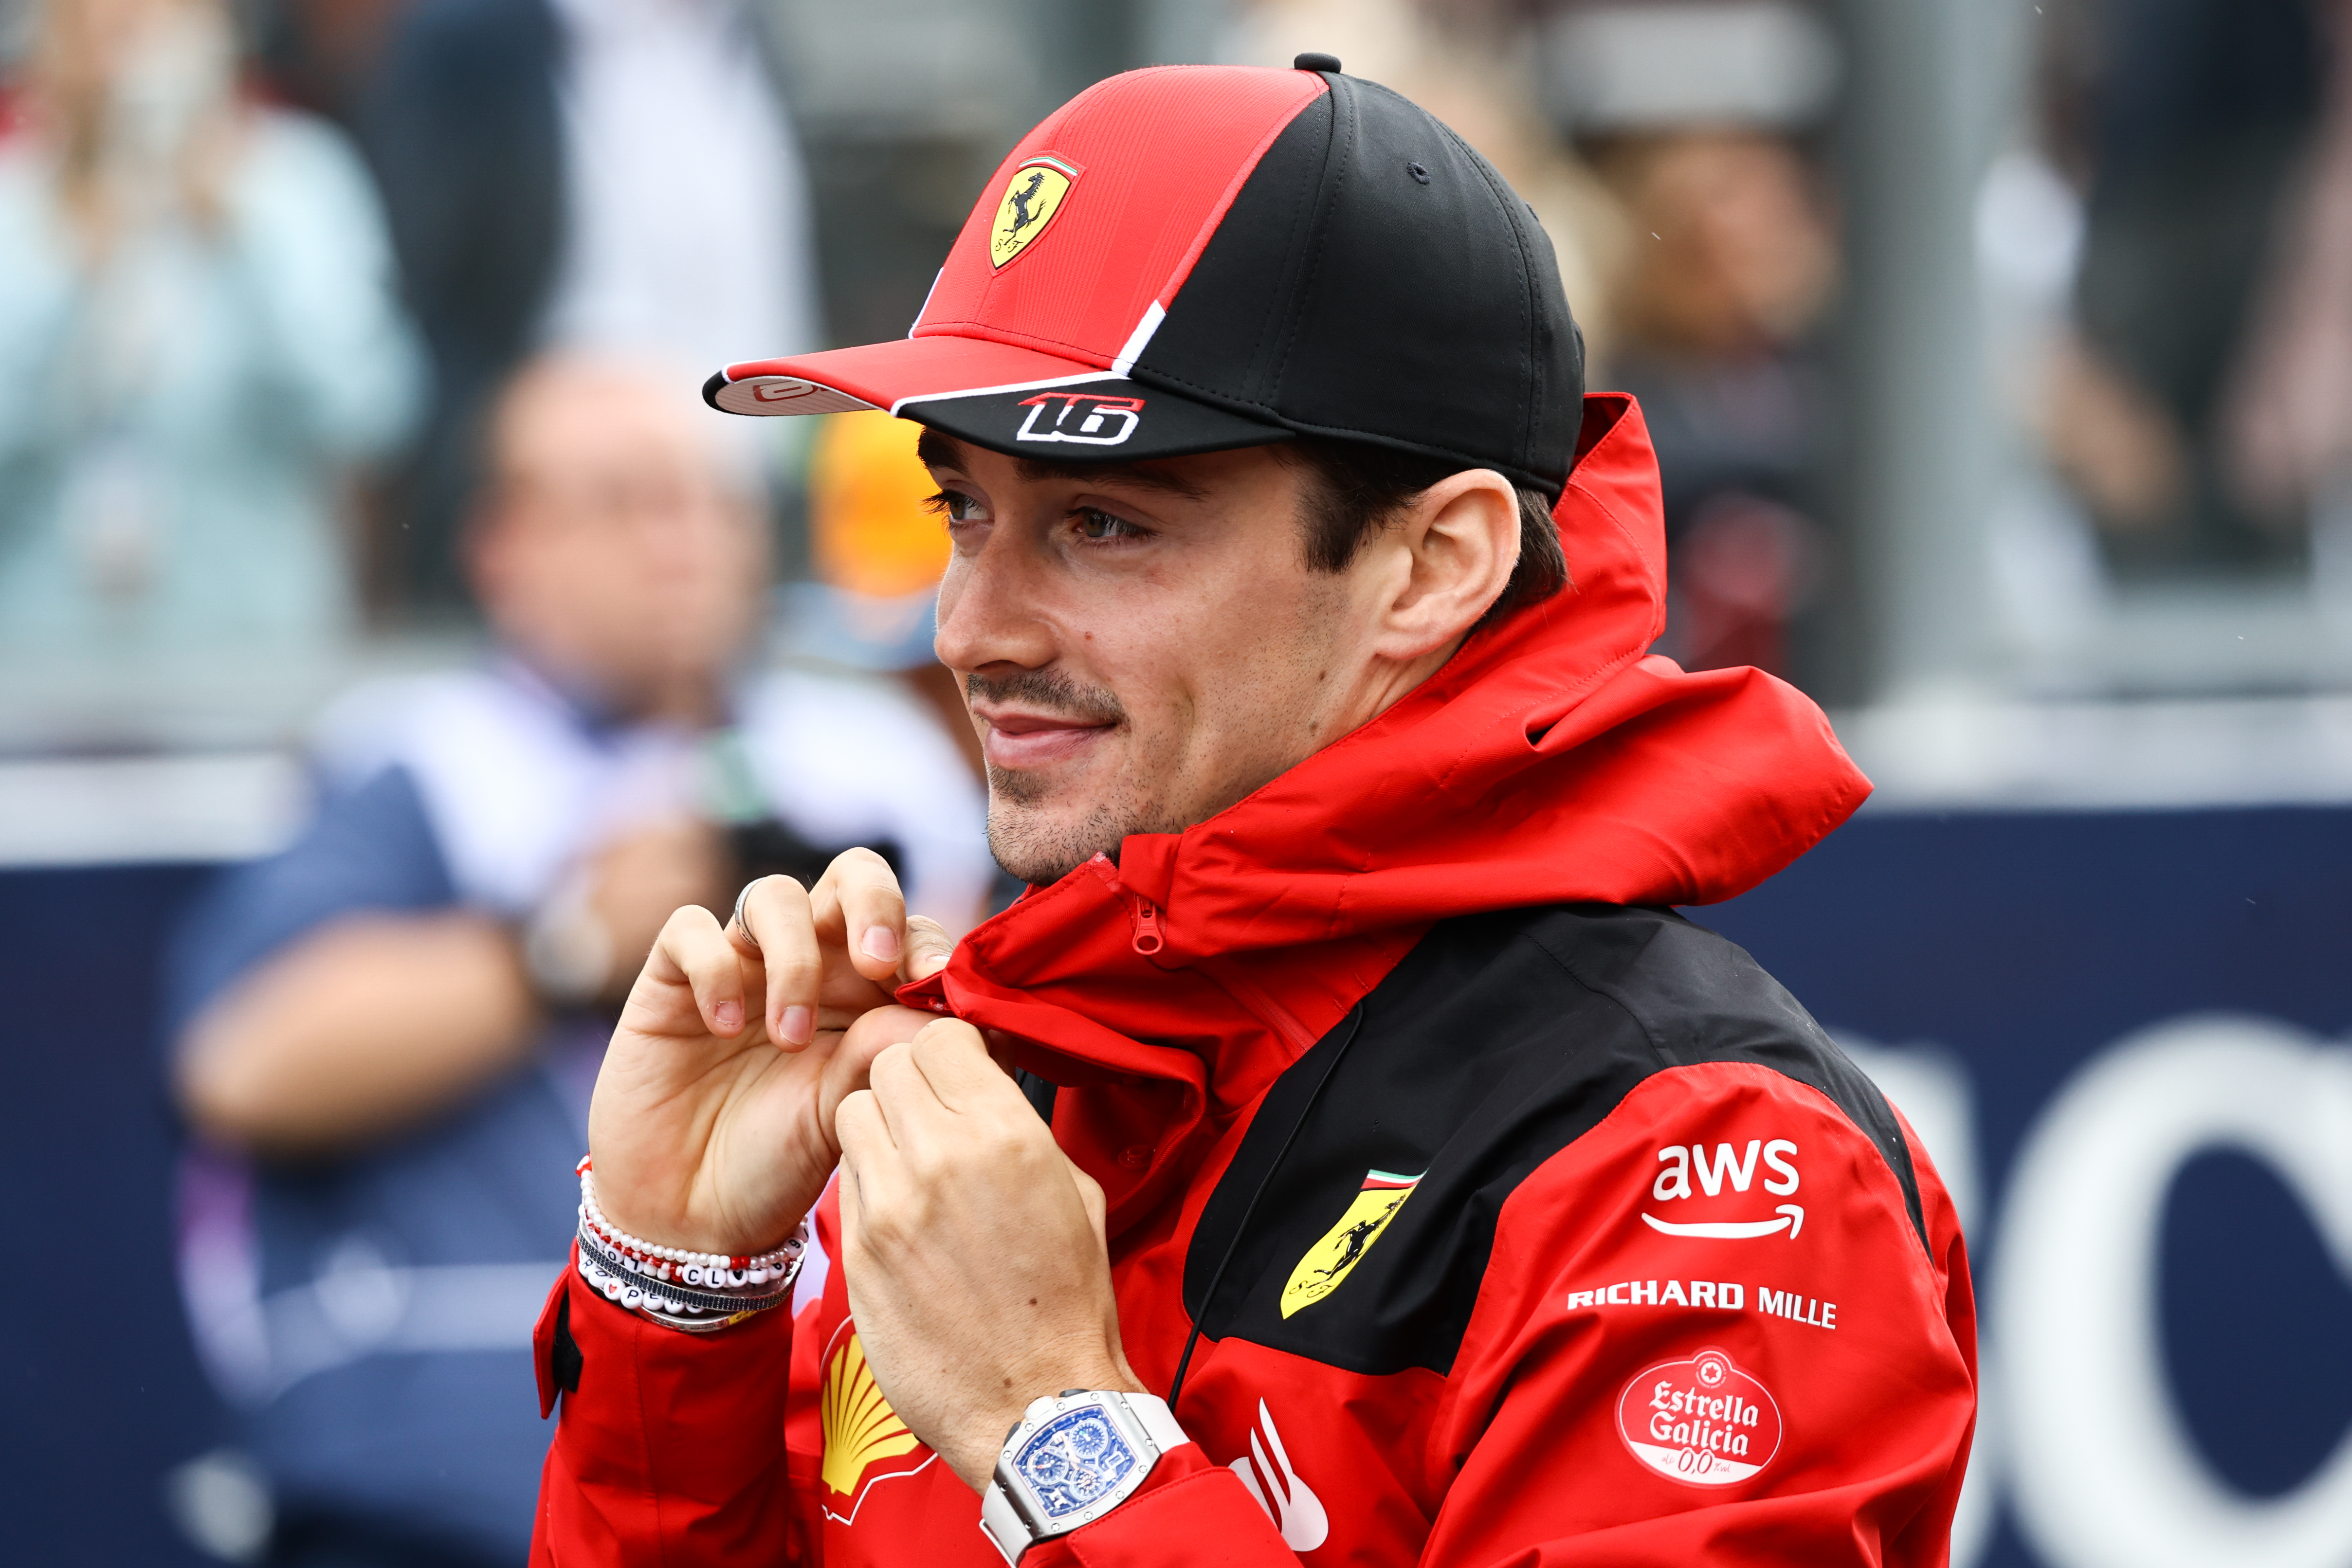 Charles Leclerc of Ferrari before the Formula 1 Belgian Grand Prix at Spa-Francorchamps in Spa, Belgium, on July 30, 2023. | Source: Getty Images